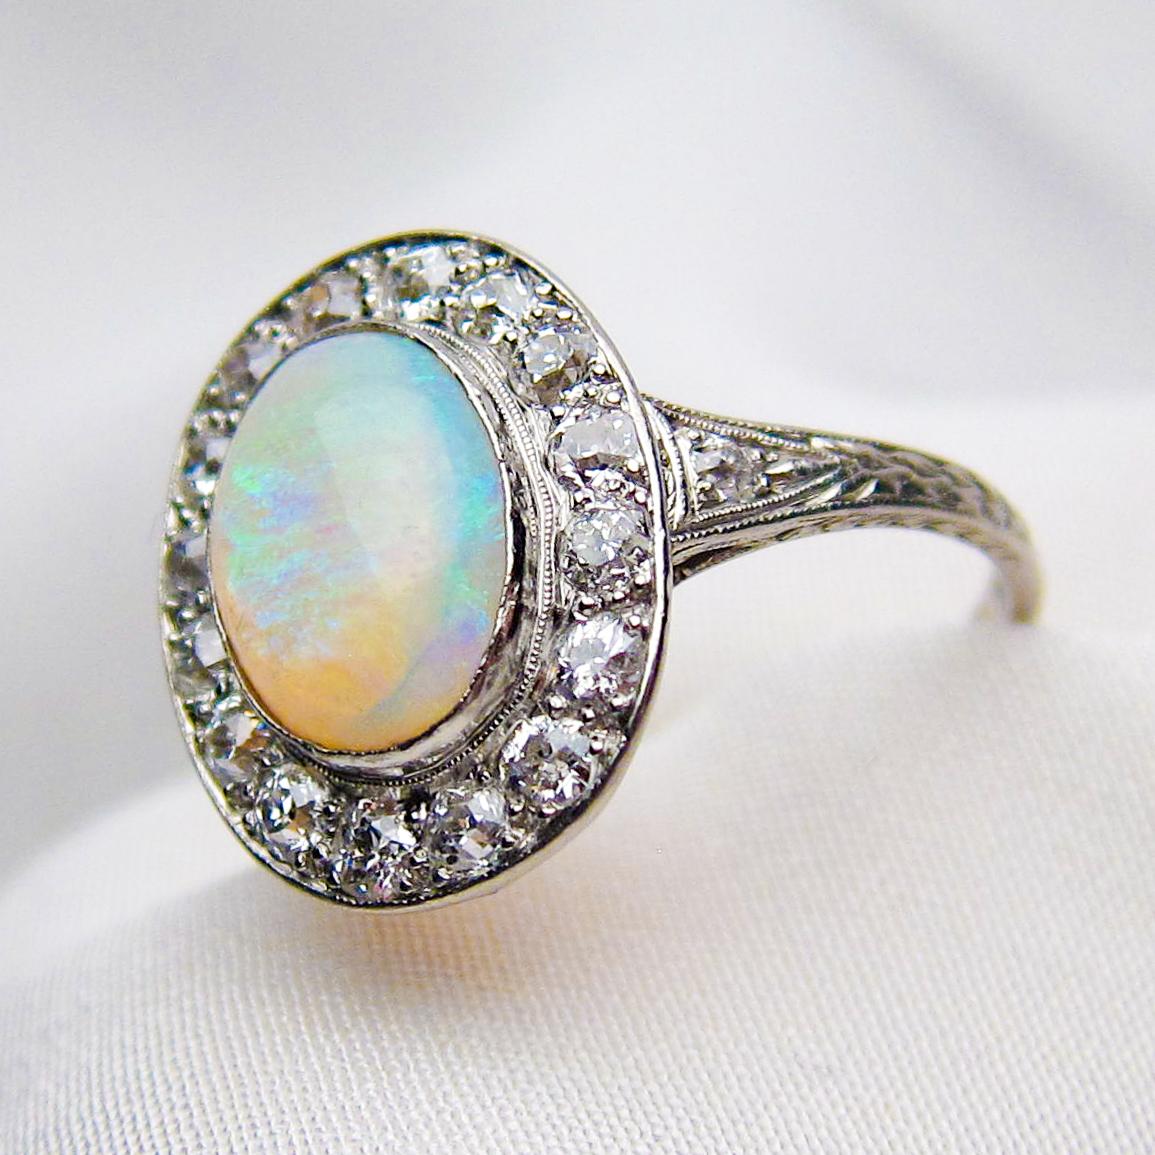 Circa 1920. This lovely Art Deco ring features a cabochon-cut 1.40 carat opal bezel-set in platinum. The opal features a blue and green play of color with a broad flash color pattern and is surrounded by a halo of 16 round old European-cut diamonds.